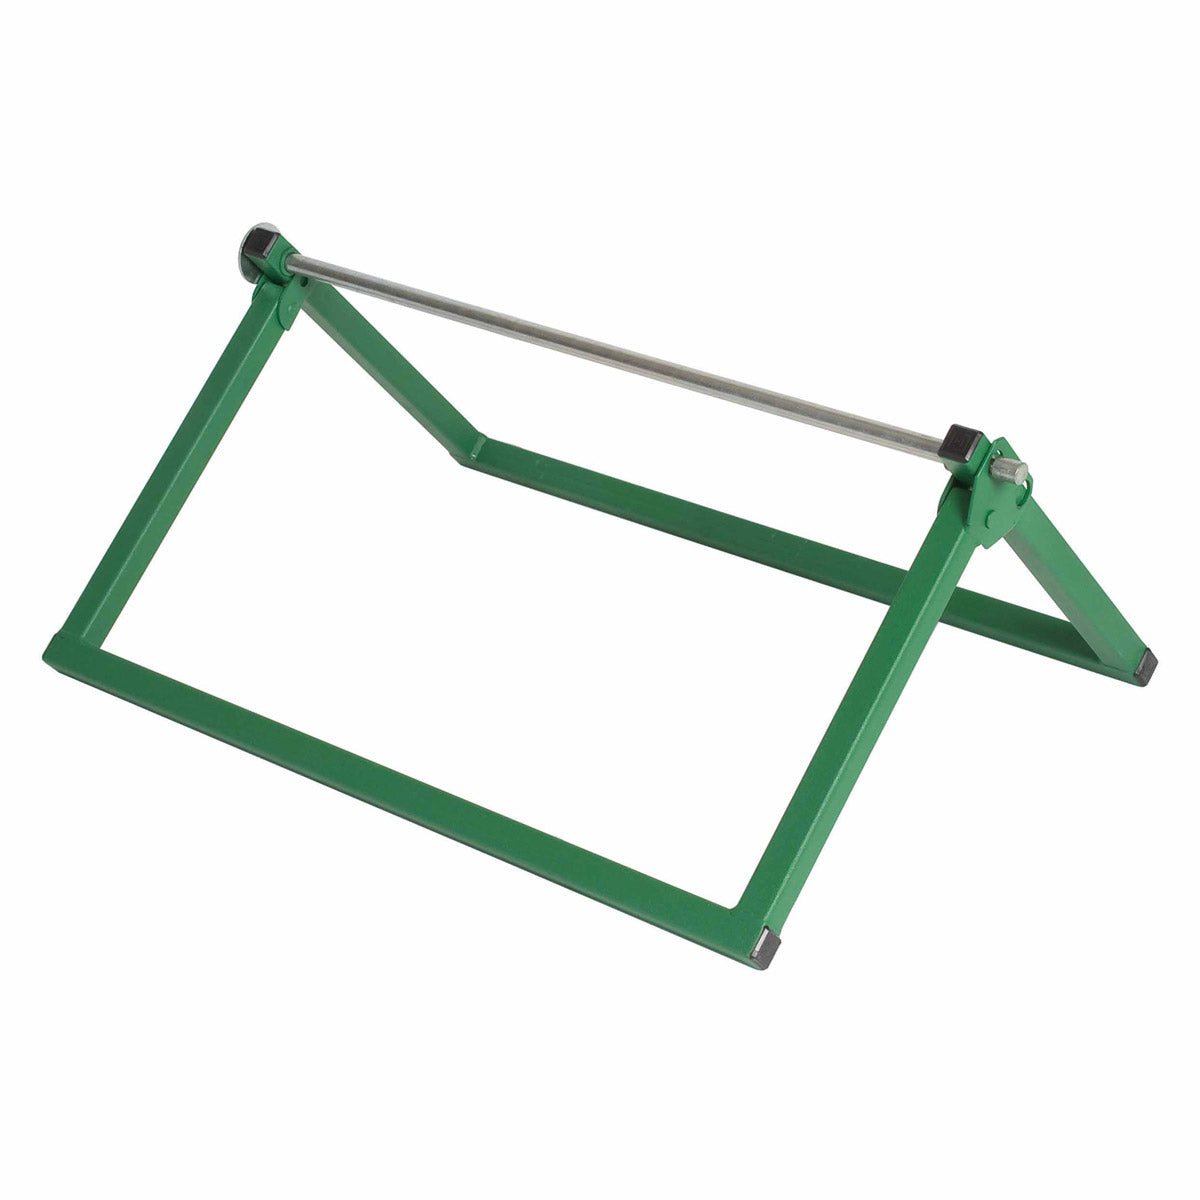 Greenlee 9520 Data Cable Caddy